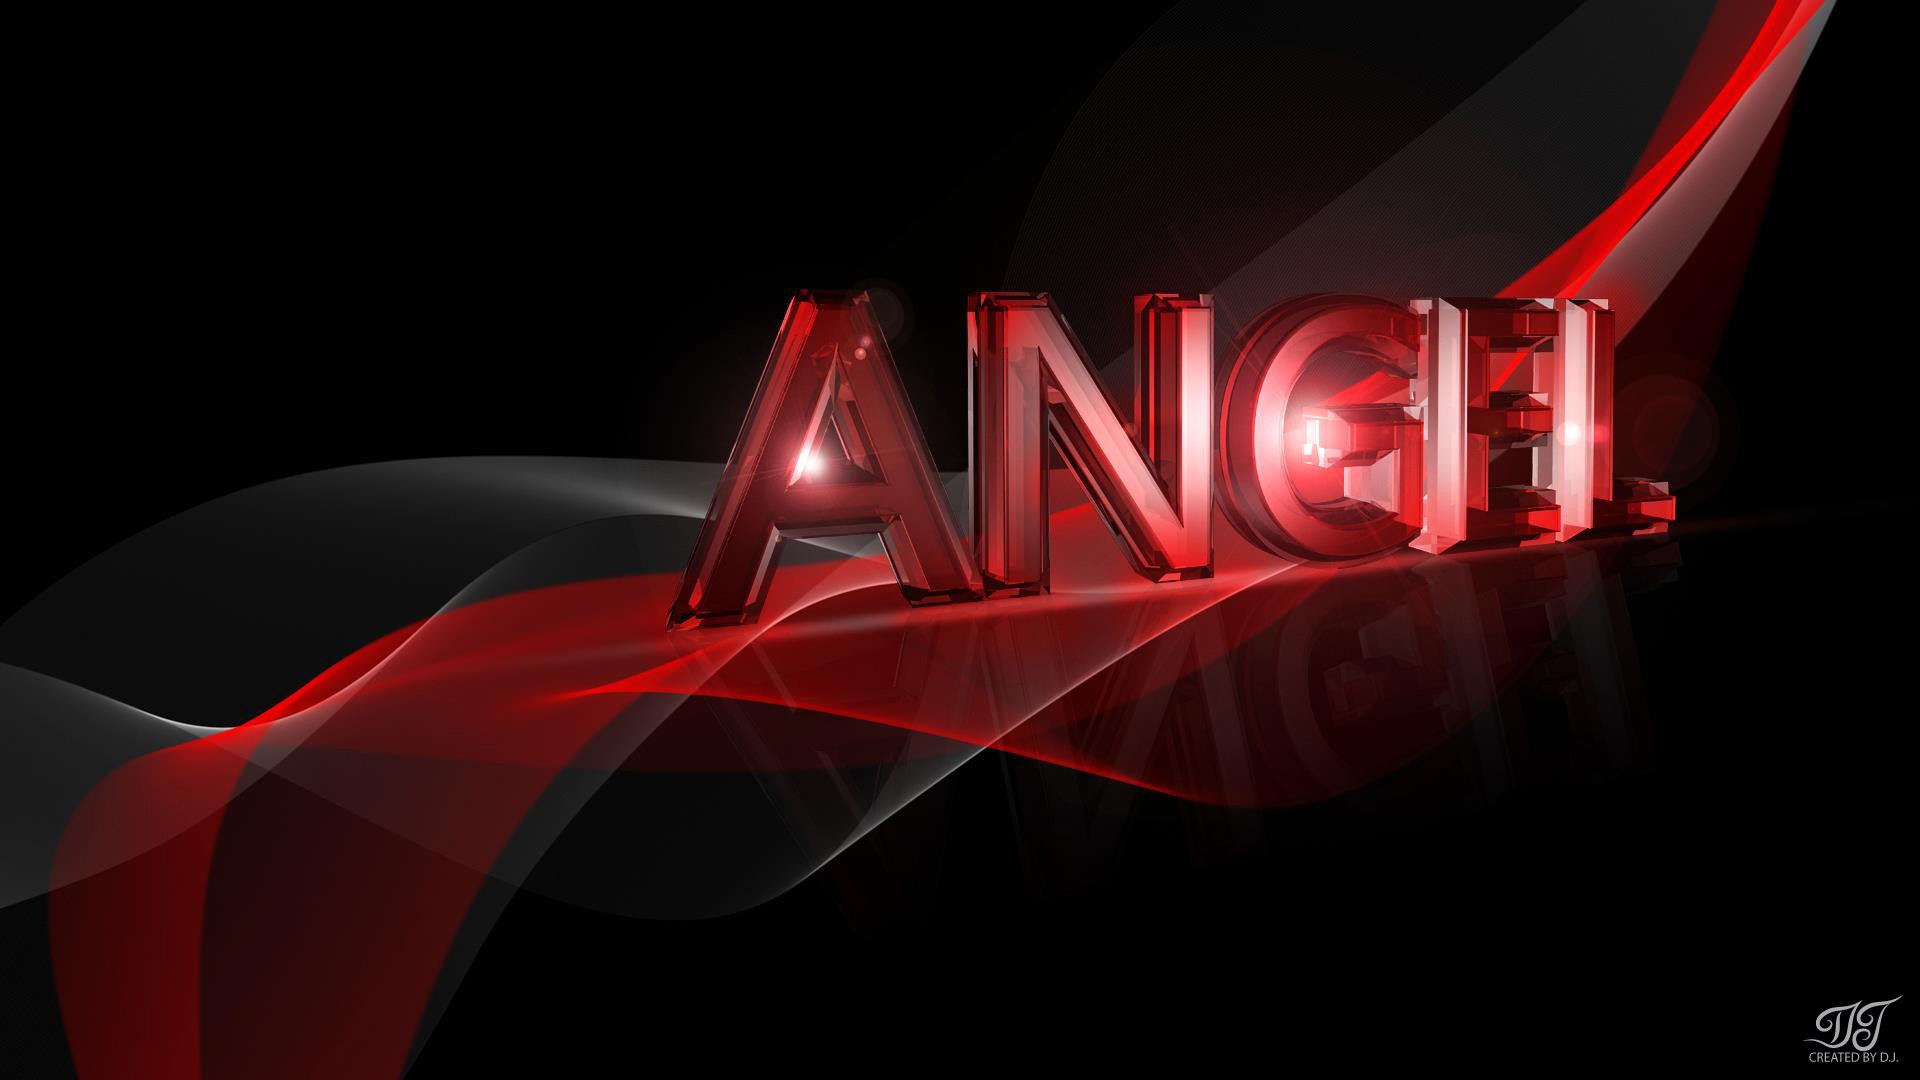 Download Angel Name Wallpaper Gallery - Graphic Design , HD Wallpaper & Backgrounds